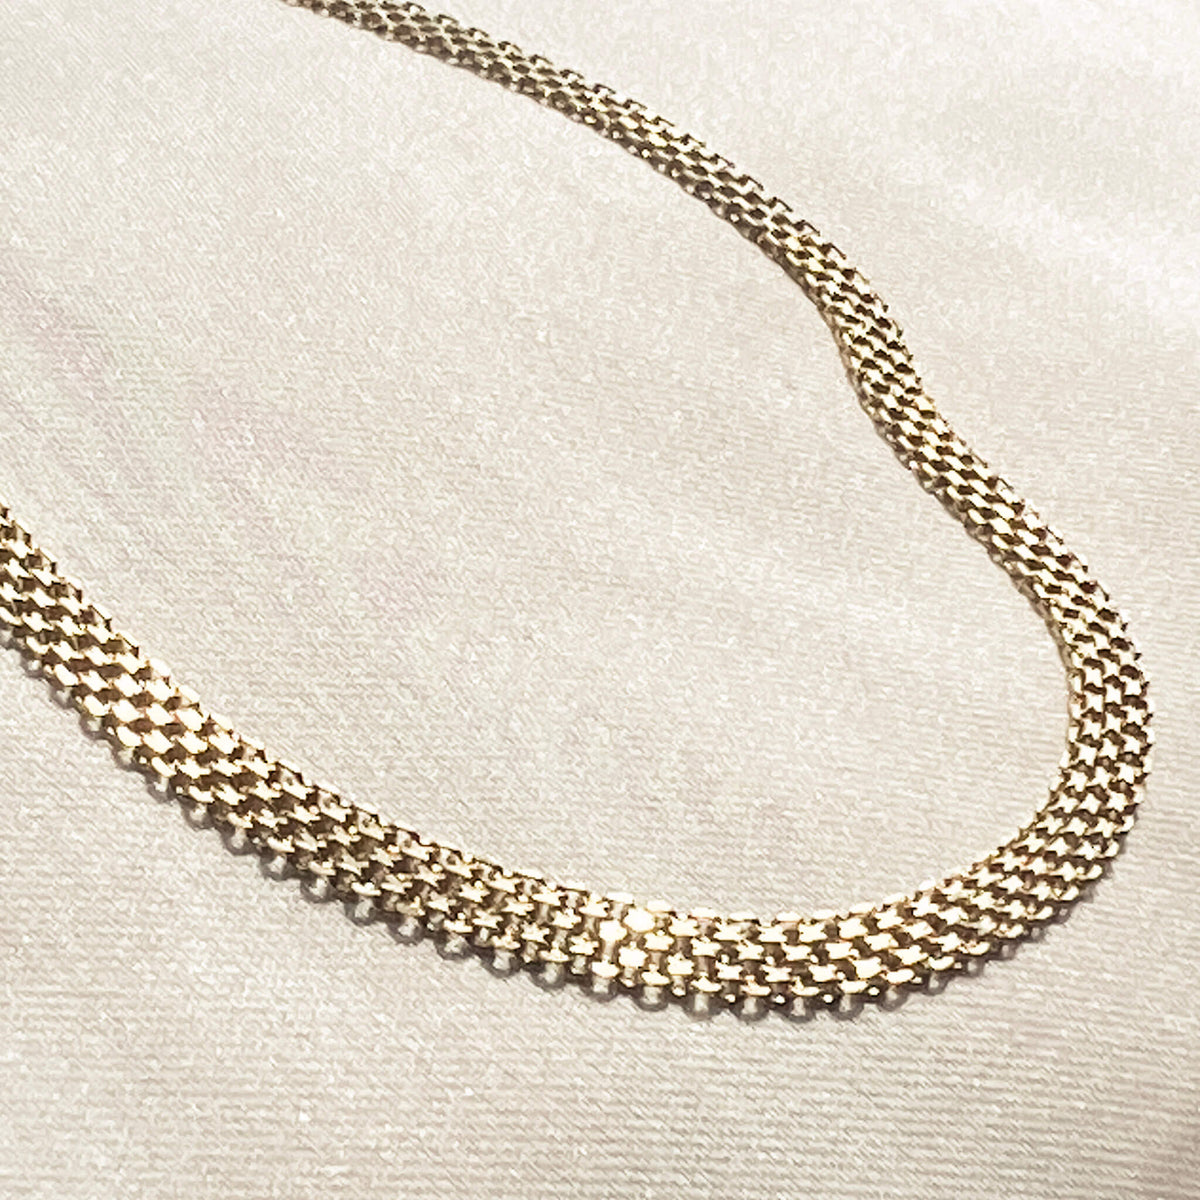 gold debonair chain on soft silk. The chain has a unique texture and design which folds in an elegant way. It has an extension clasp so it can be worn as a choker or extended. 